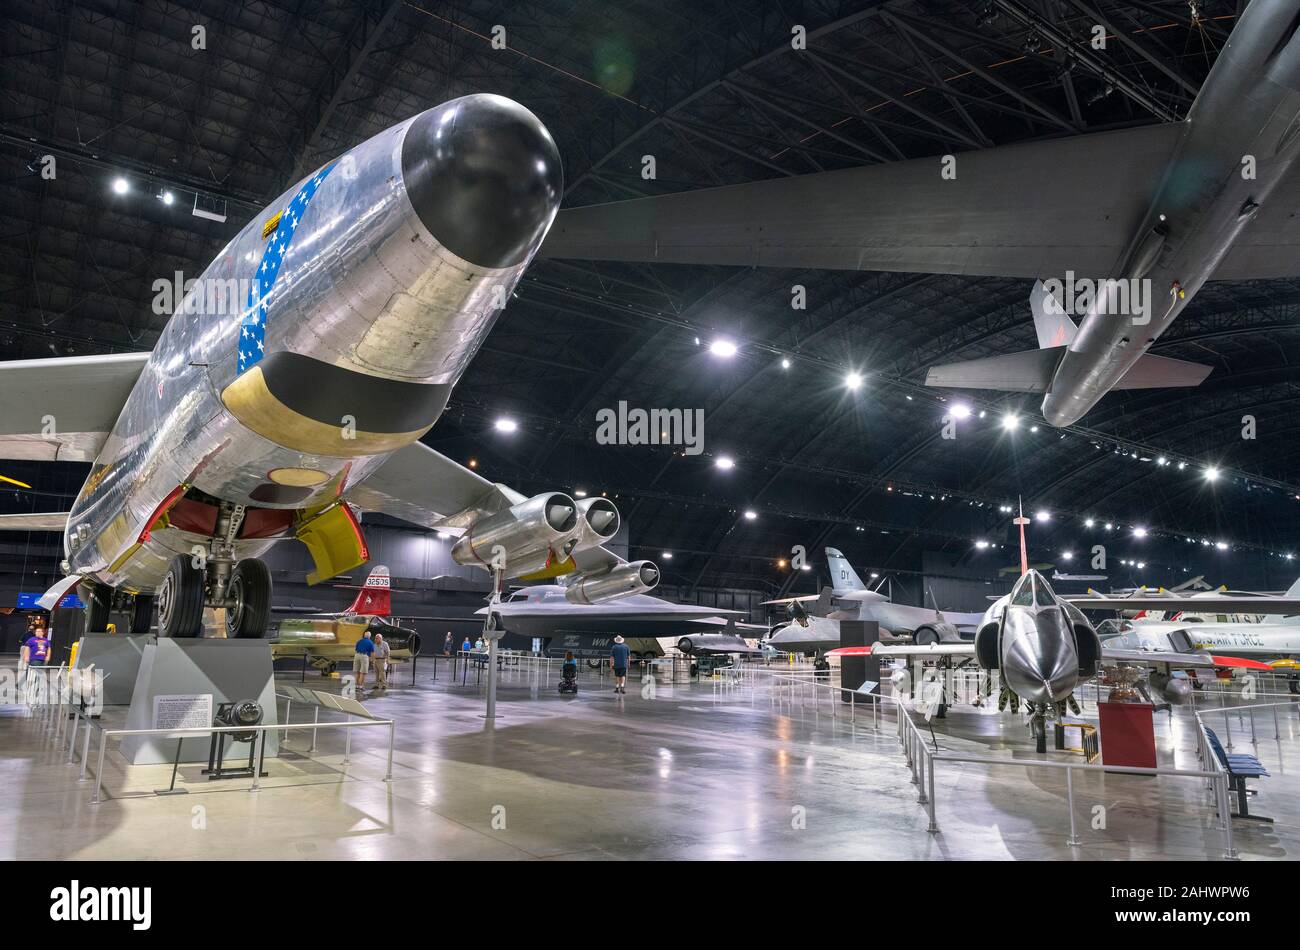 Cold War aircraft with a Boeing RB-47H Stratojet strategic bomber in the foreground and a Convair F-102 Delta Dagger to the right, National Museum of the United States Air Force (formerly the United States Air Force Museum), Dayton, Ohio, USA. Stock Photo